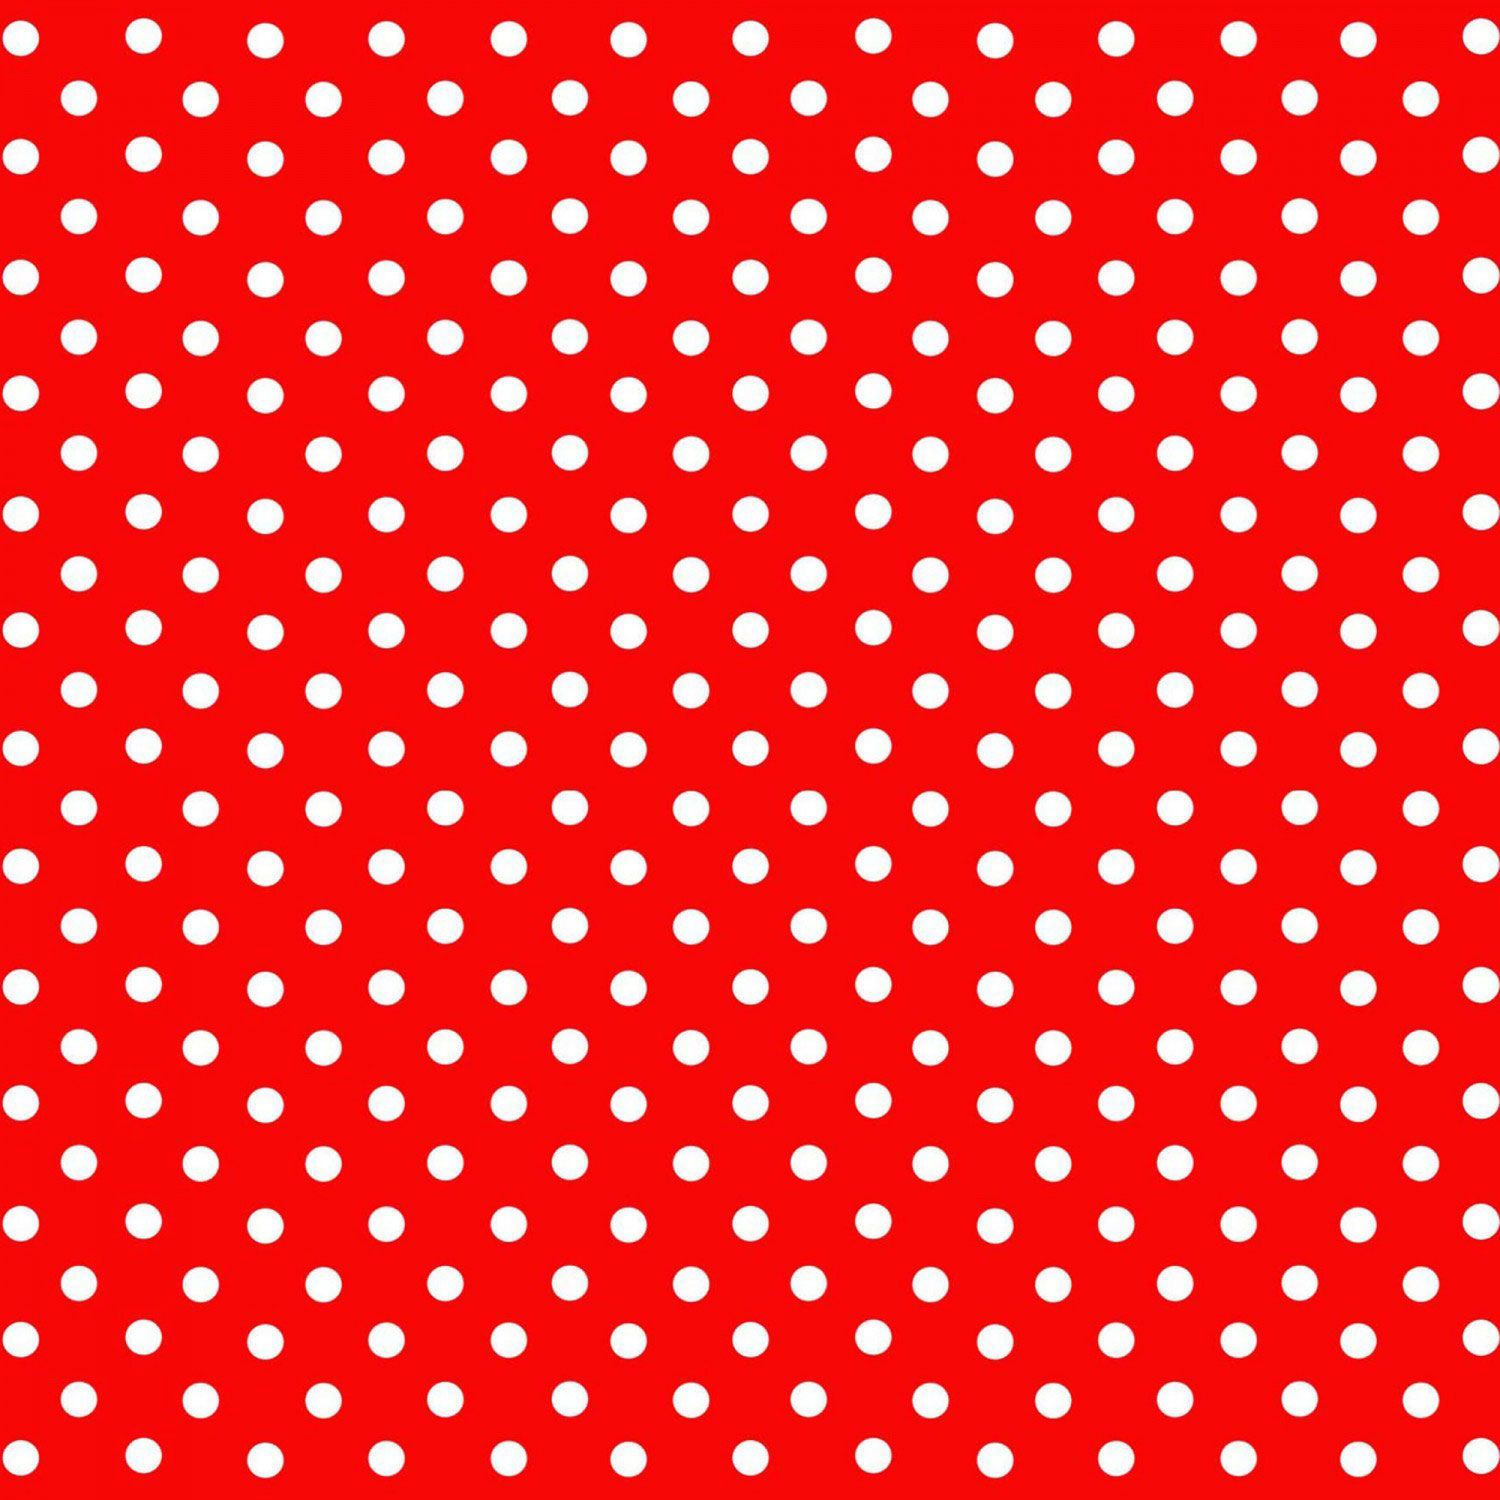 Red Minnie Mouse Polka Dots Background